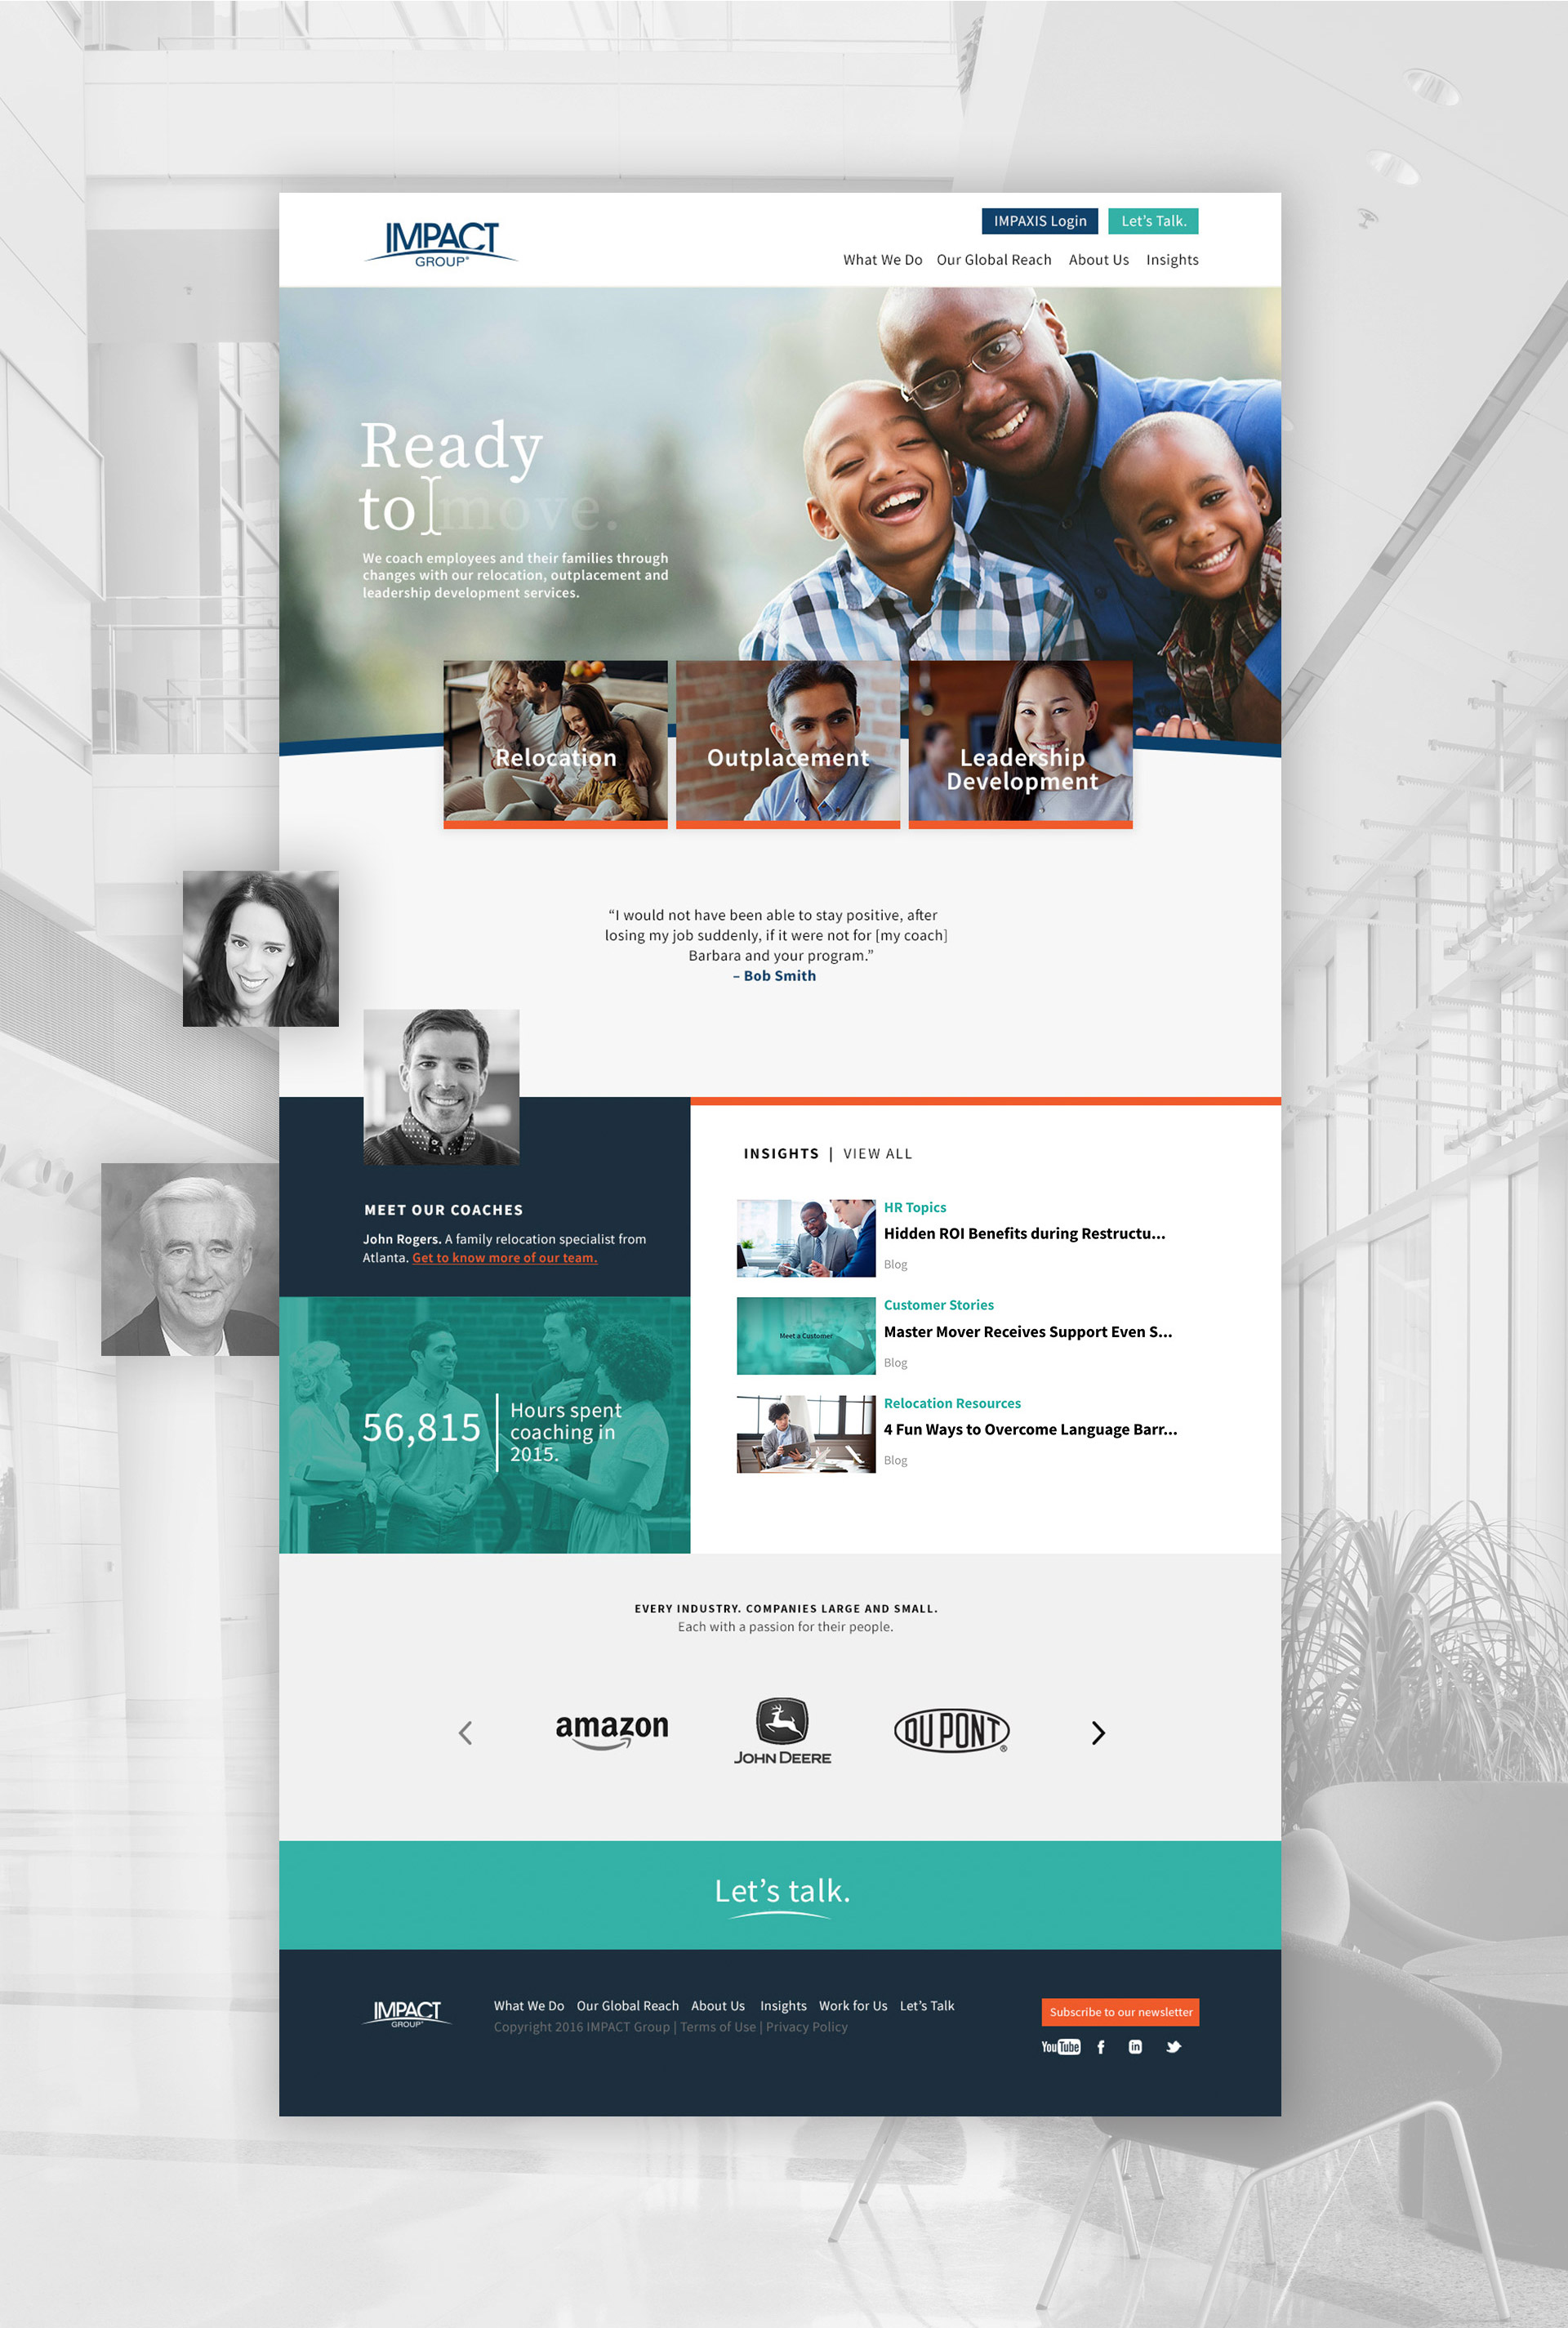 The Impact Group Website design